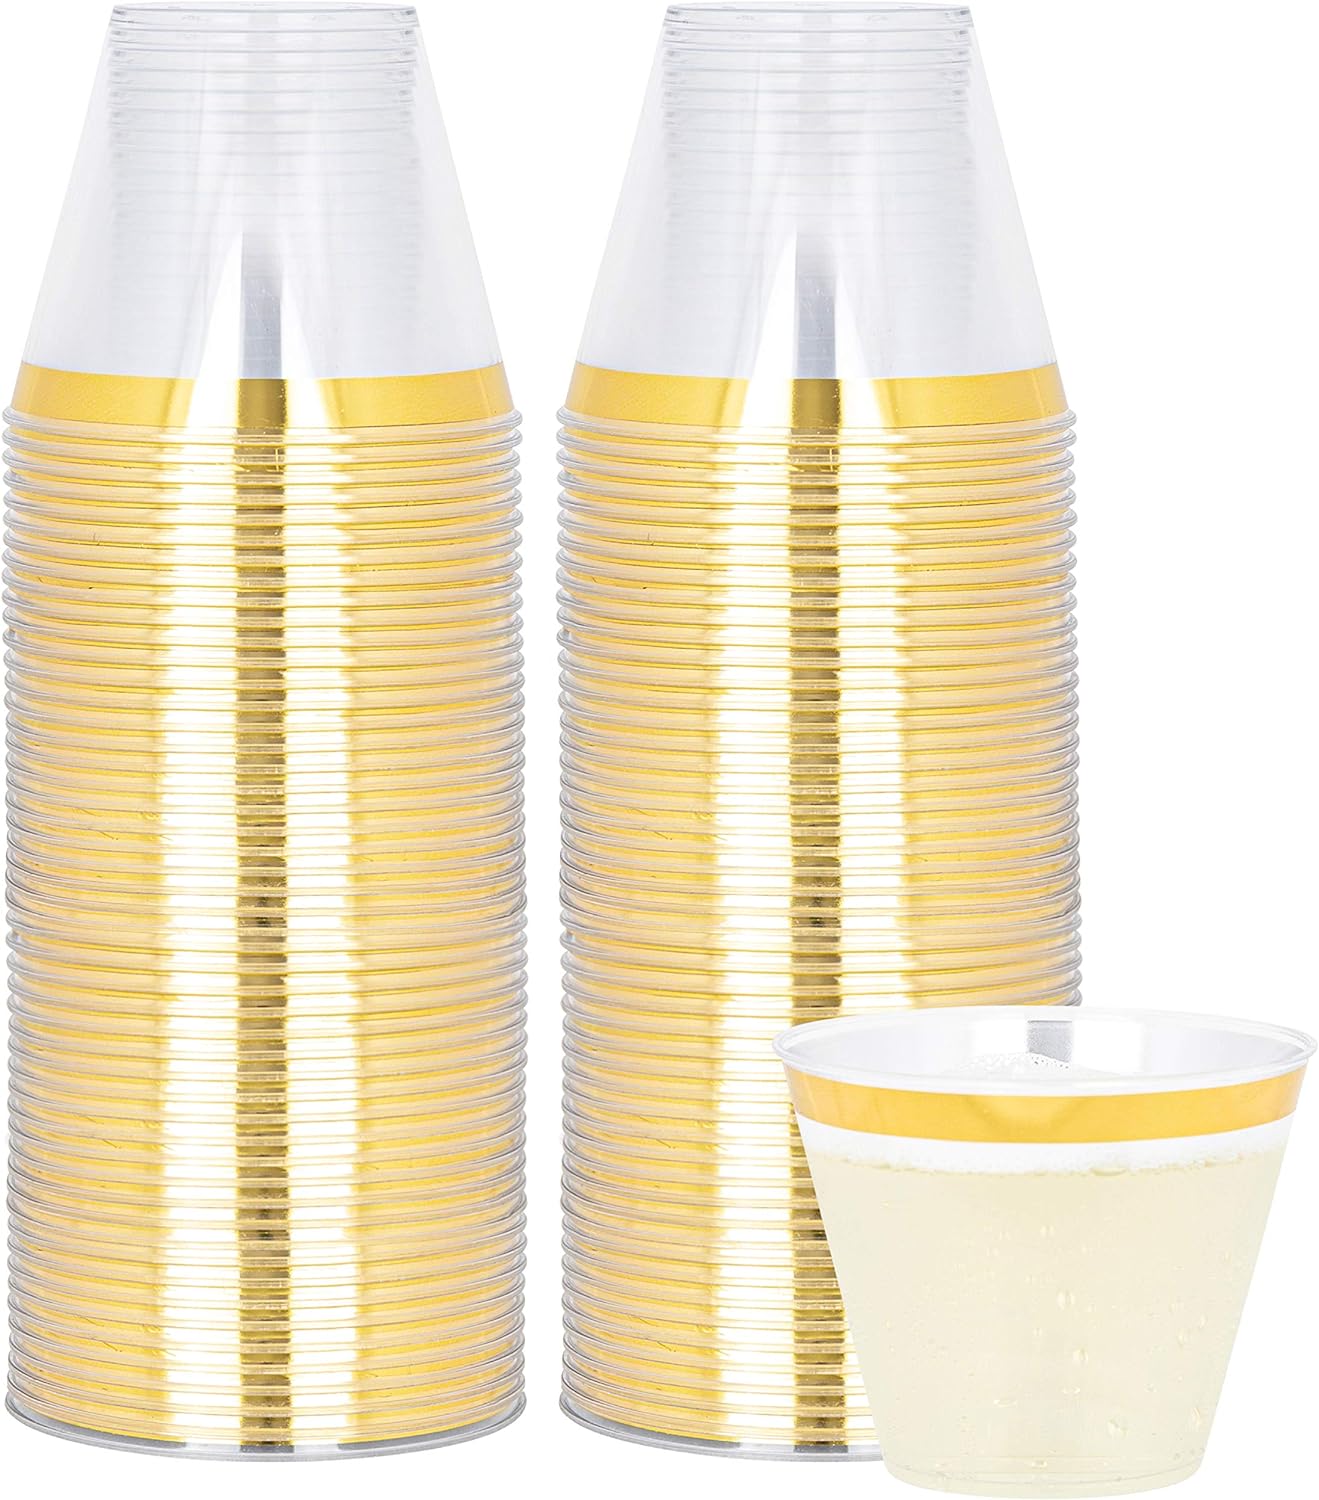 PLASTICPRO 9 oz Disposable Plastic Party Cups,Old fashioned Designed Tumblers, With gold Rim 100 Count, Crystal Clear